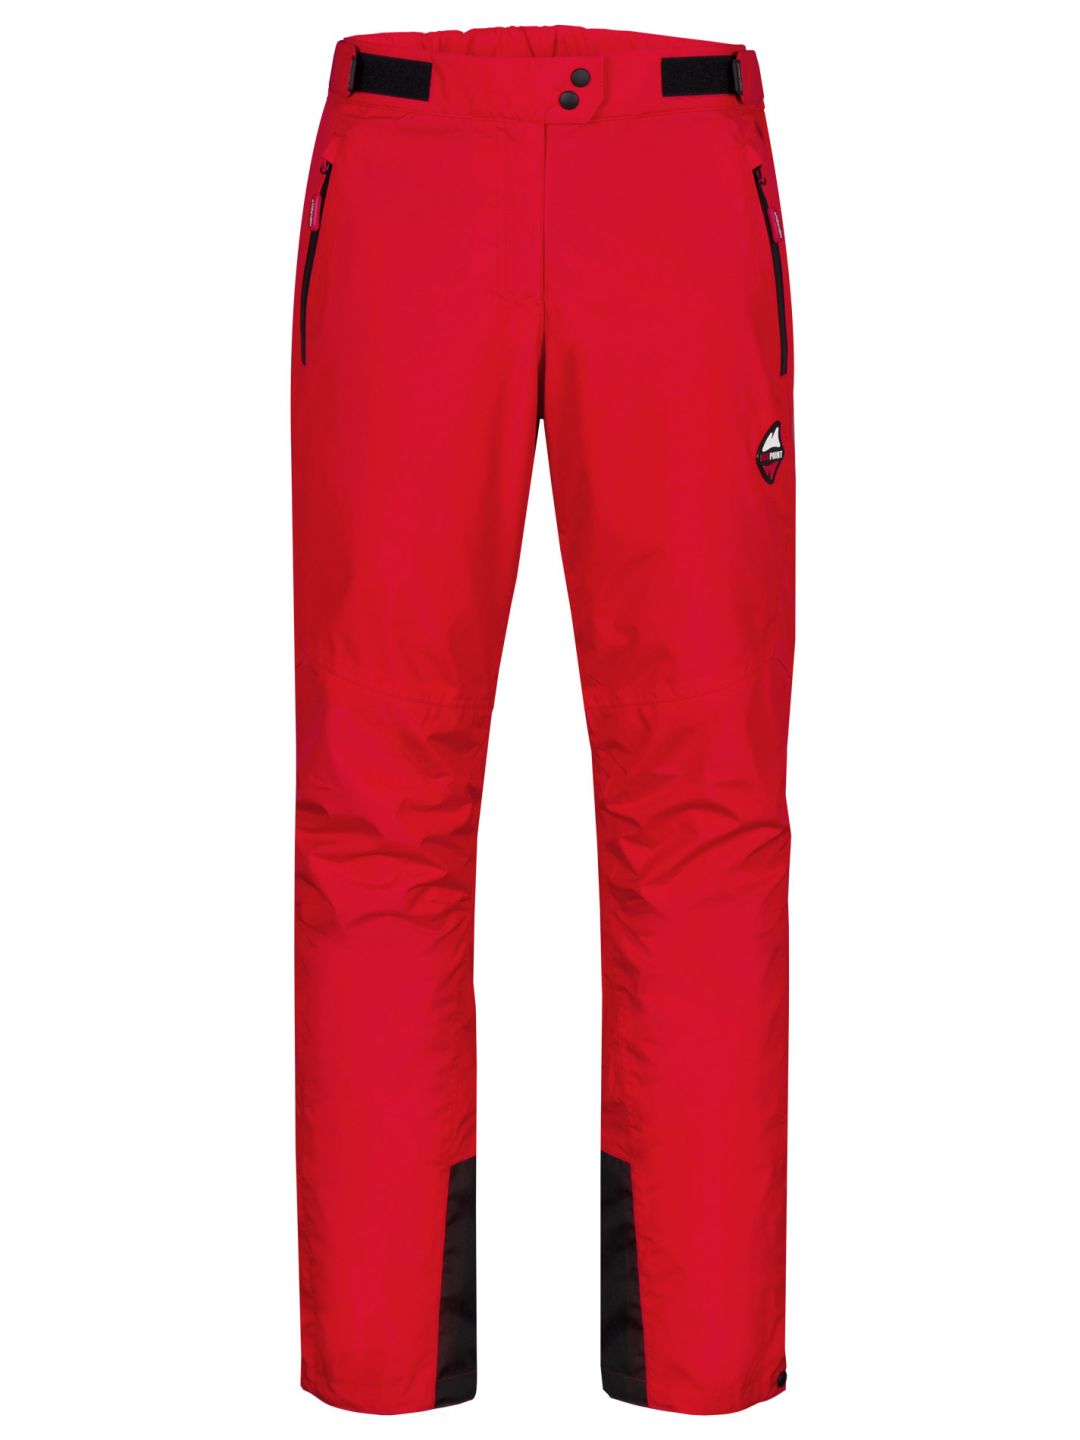 HIGH POINT Coral 2.0 Lady Pants red varianta: S